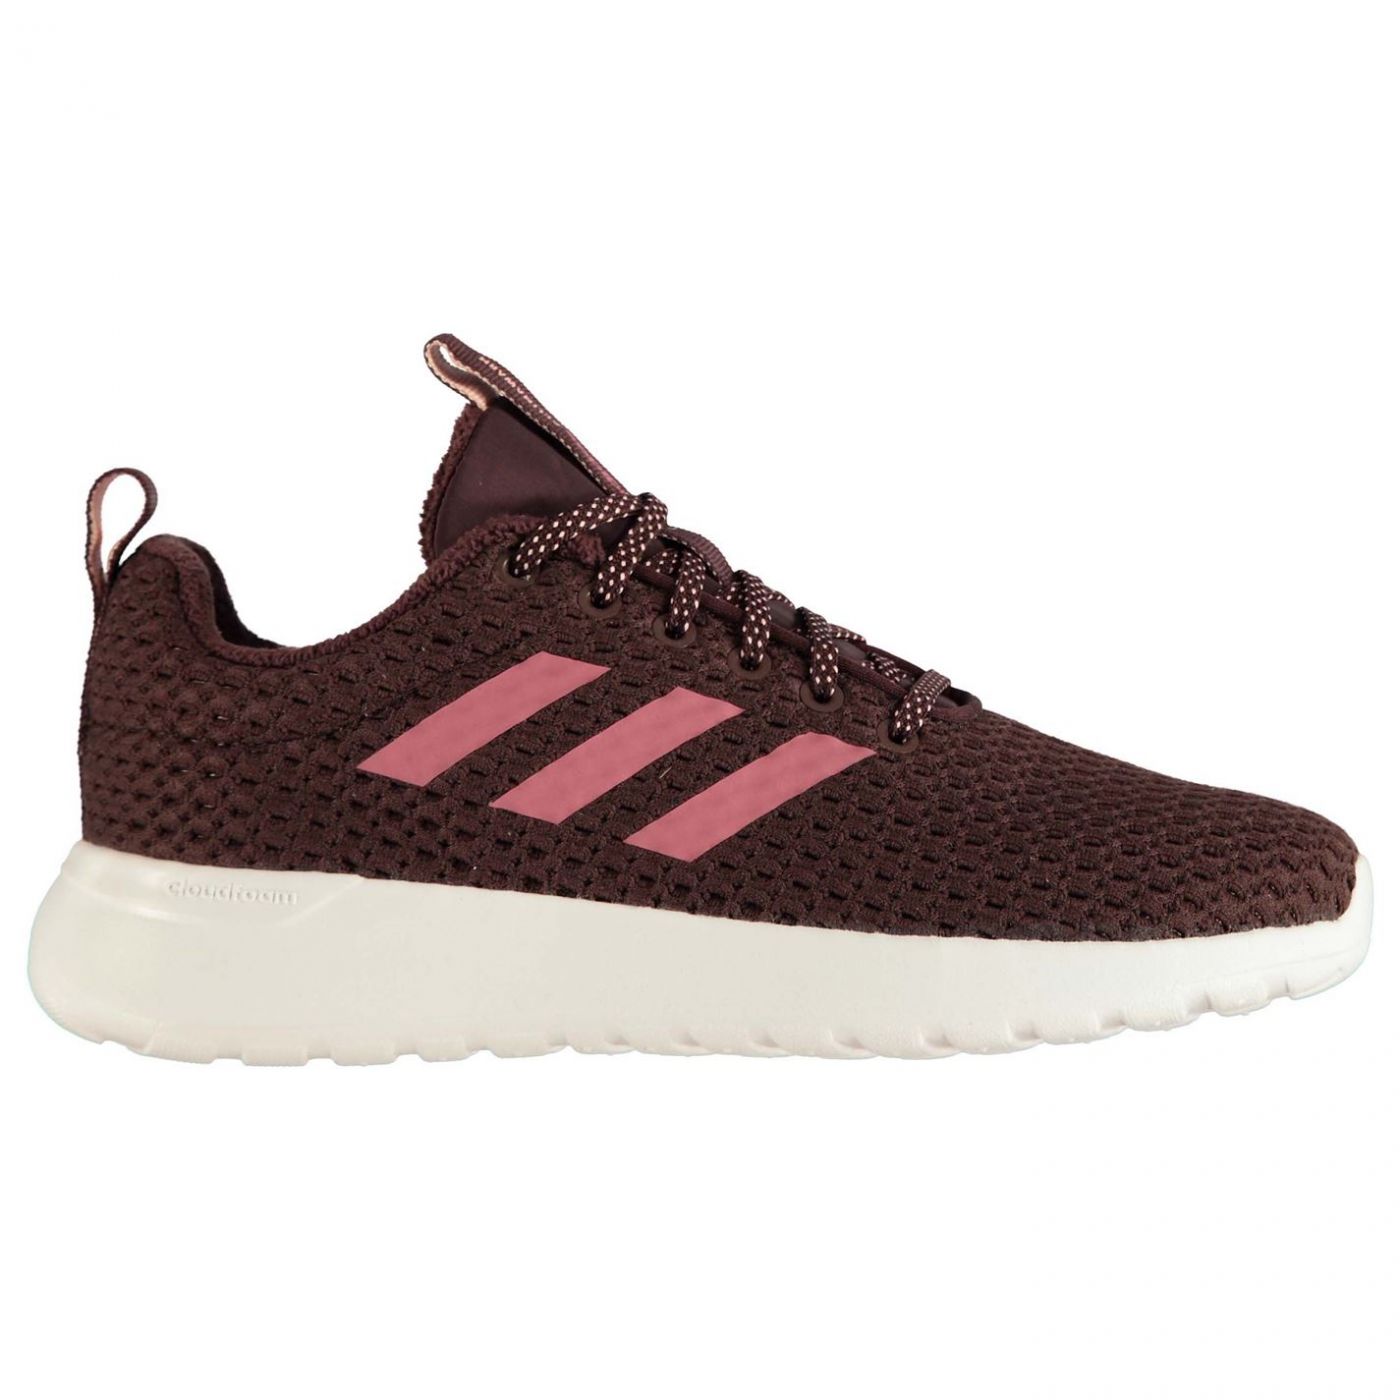 Adidas Lite Racer Climawarm Ladies Trainers